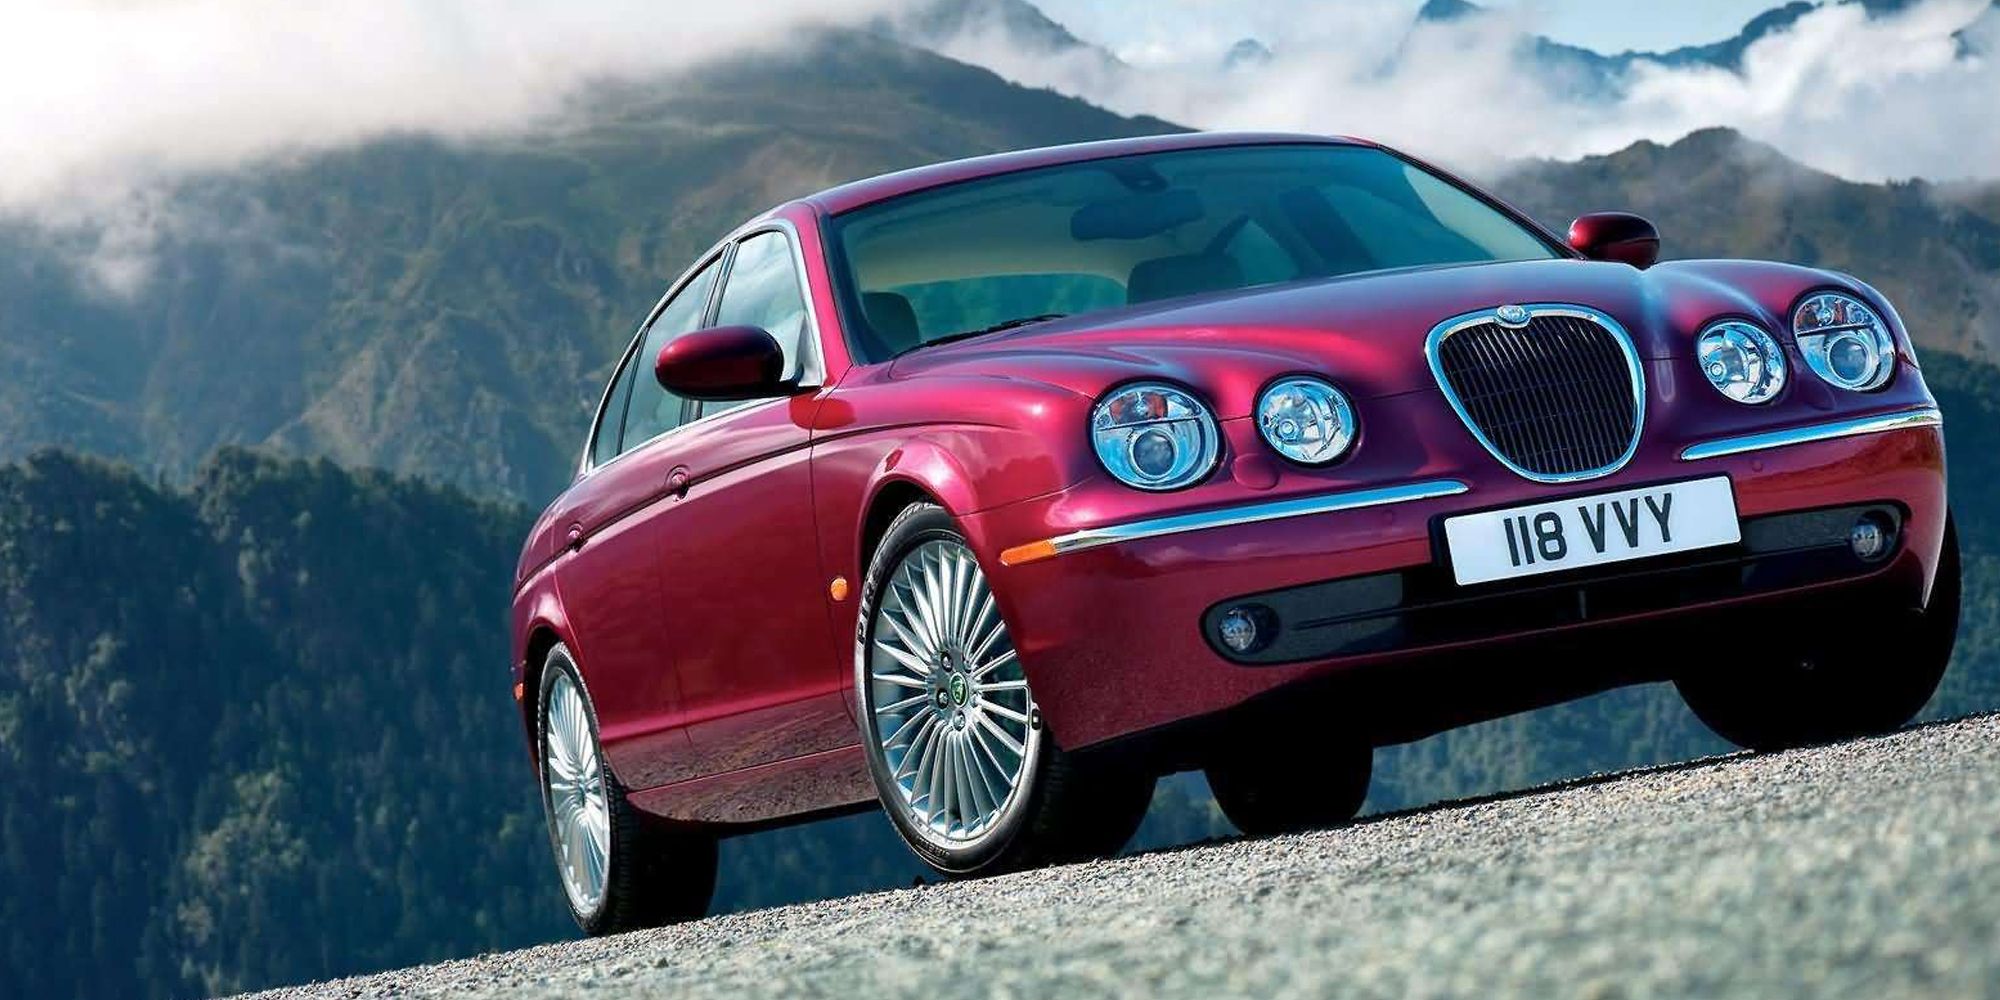 5 European Luxury Cars We Wouldn’t Touch With A 10-Foot Pole (5 That Make Great Investments)